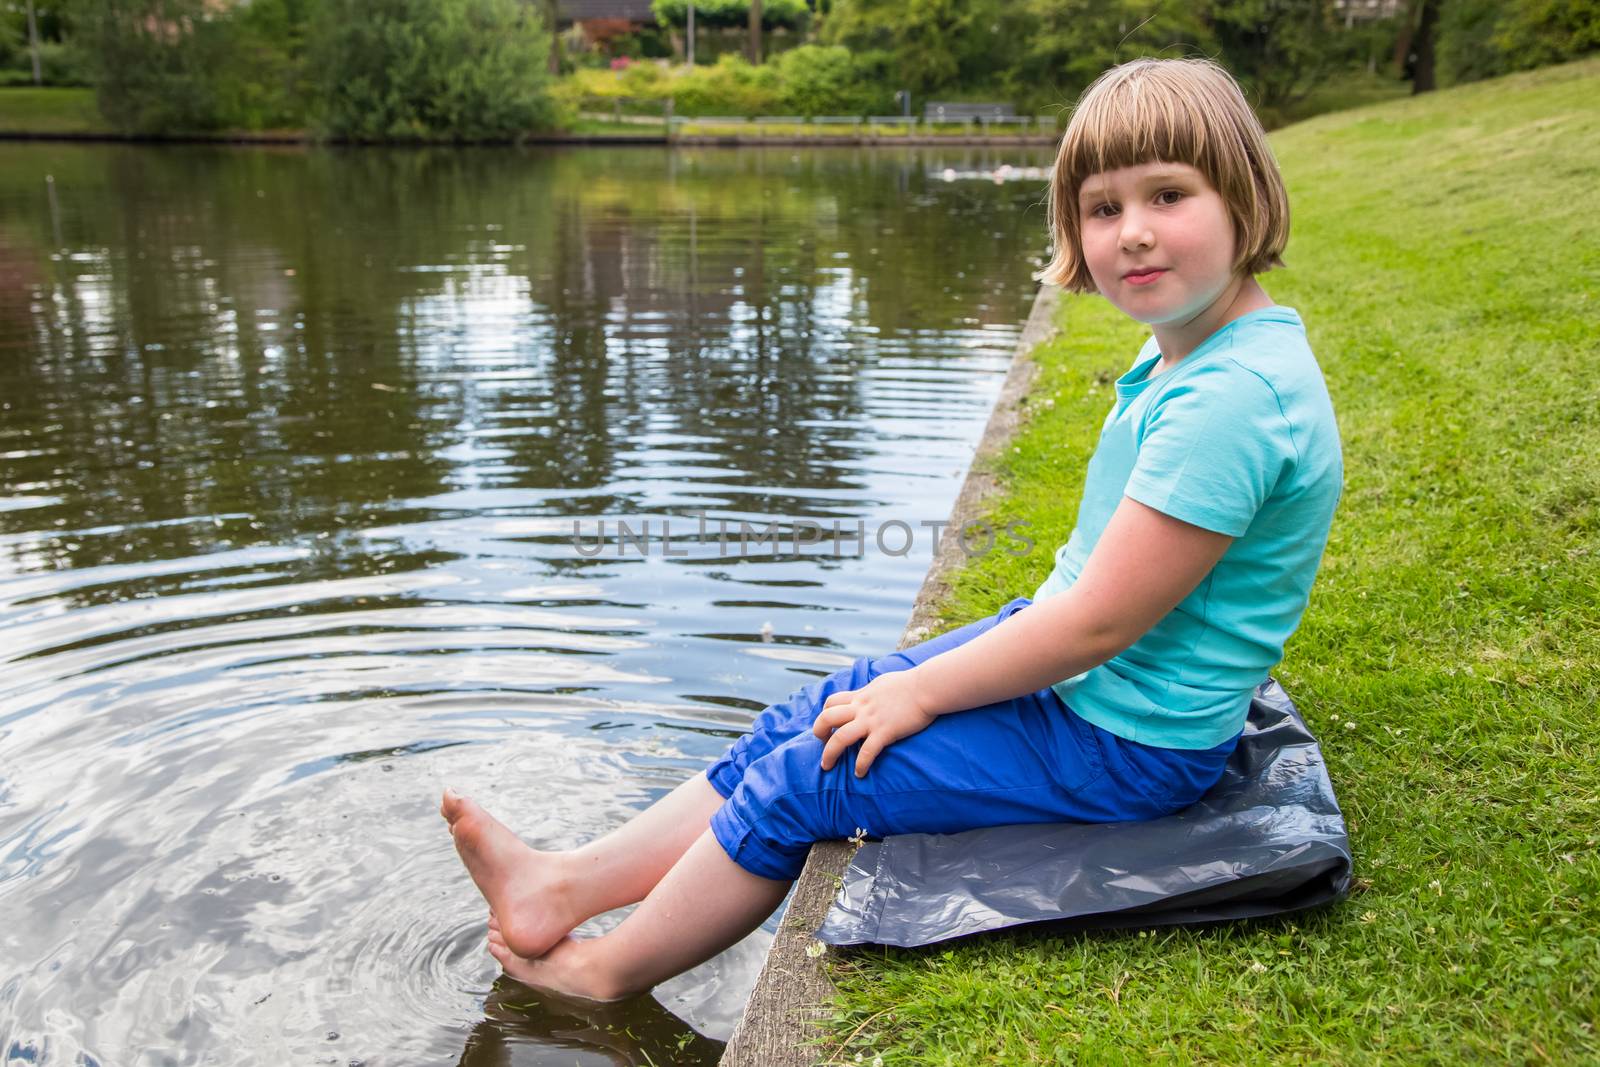 Young girl sitting with feet in pond by BenSchonewille